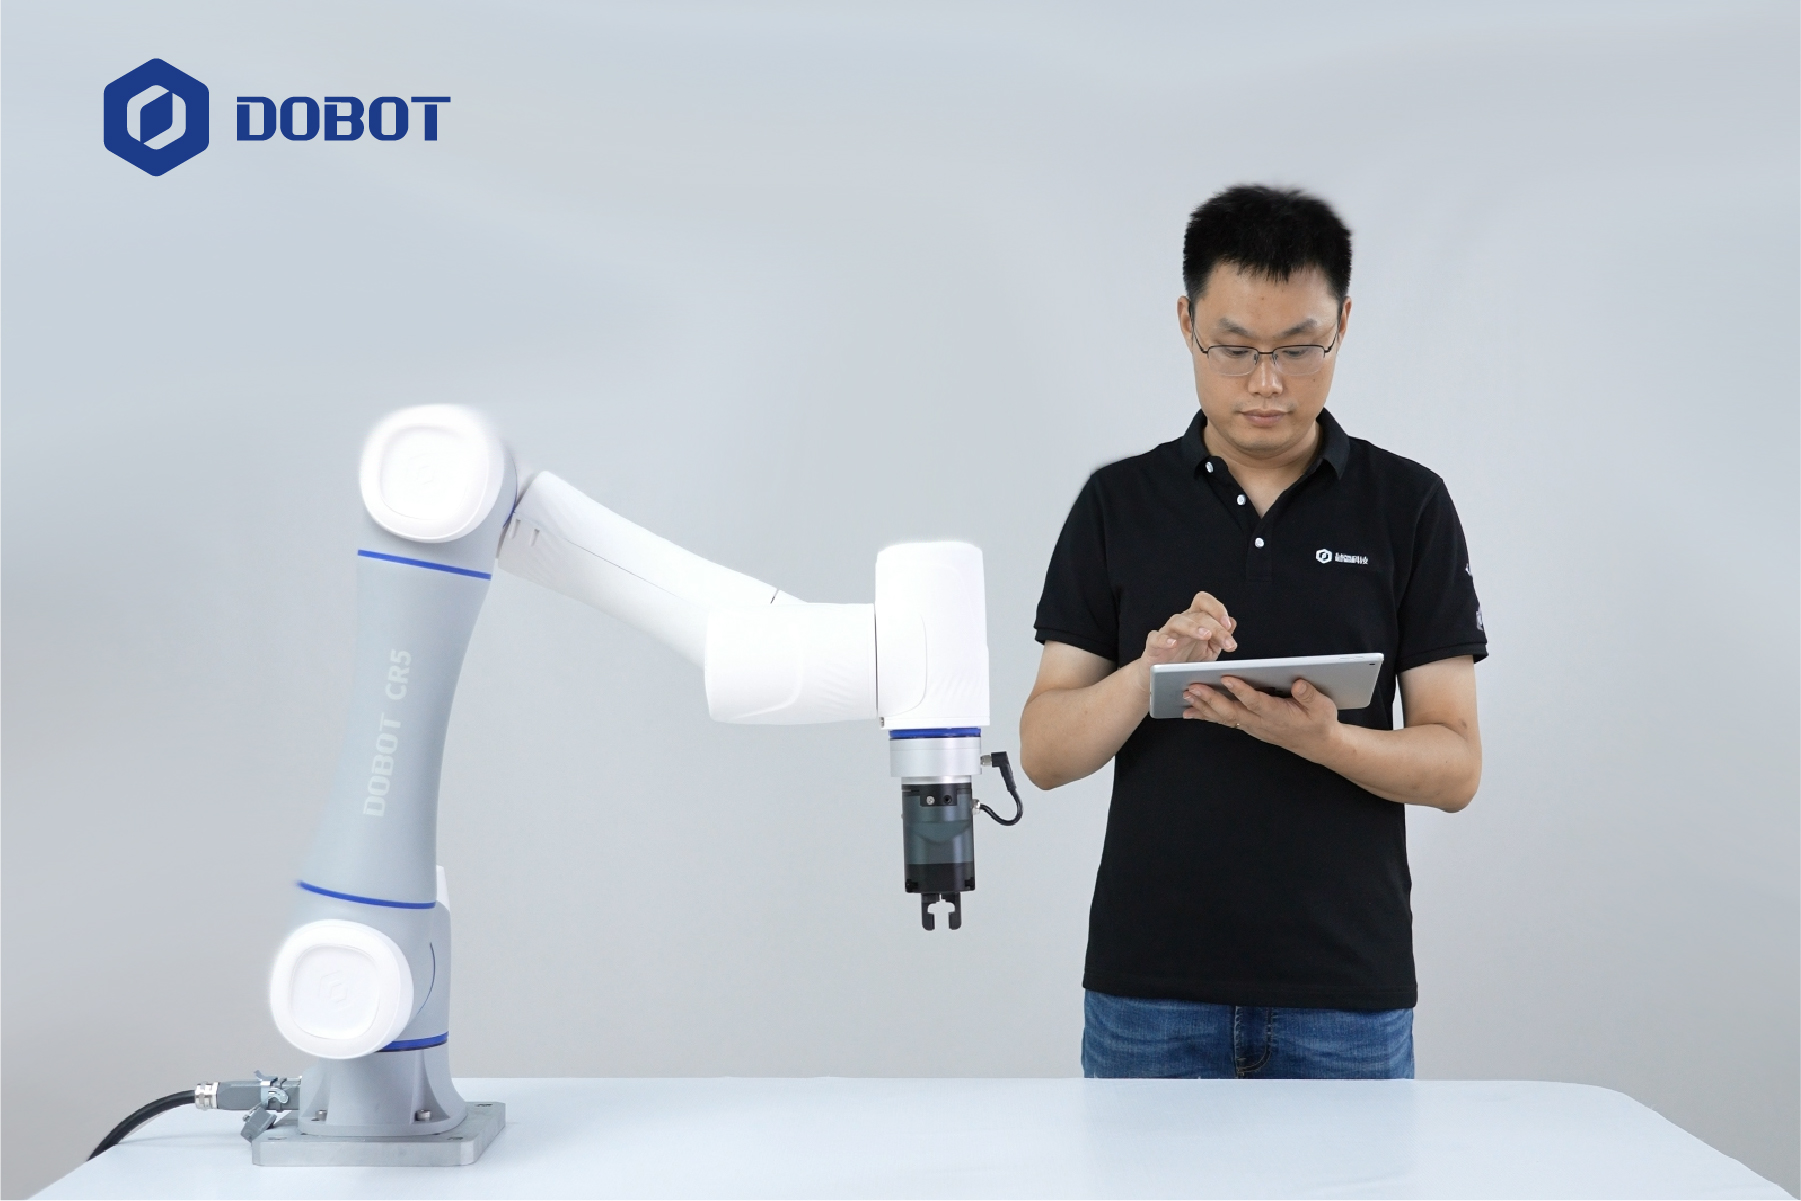 Constant Labour Growth with Cobots